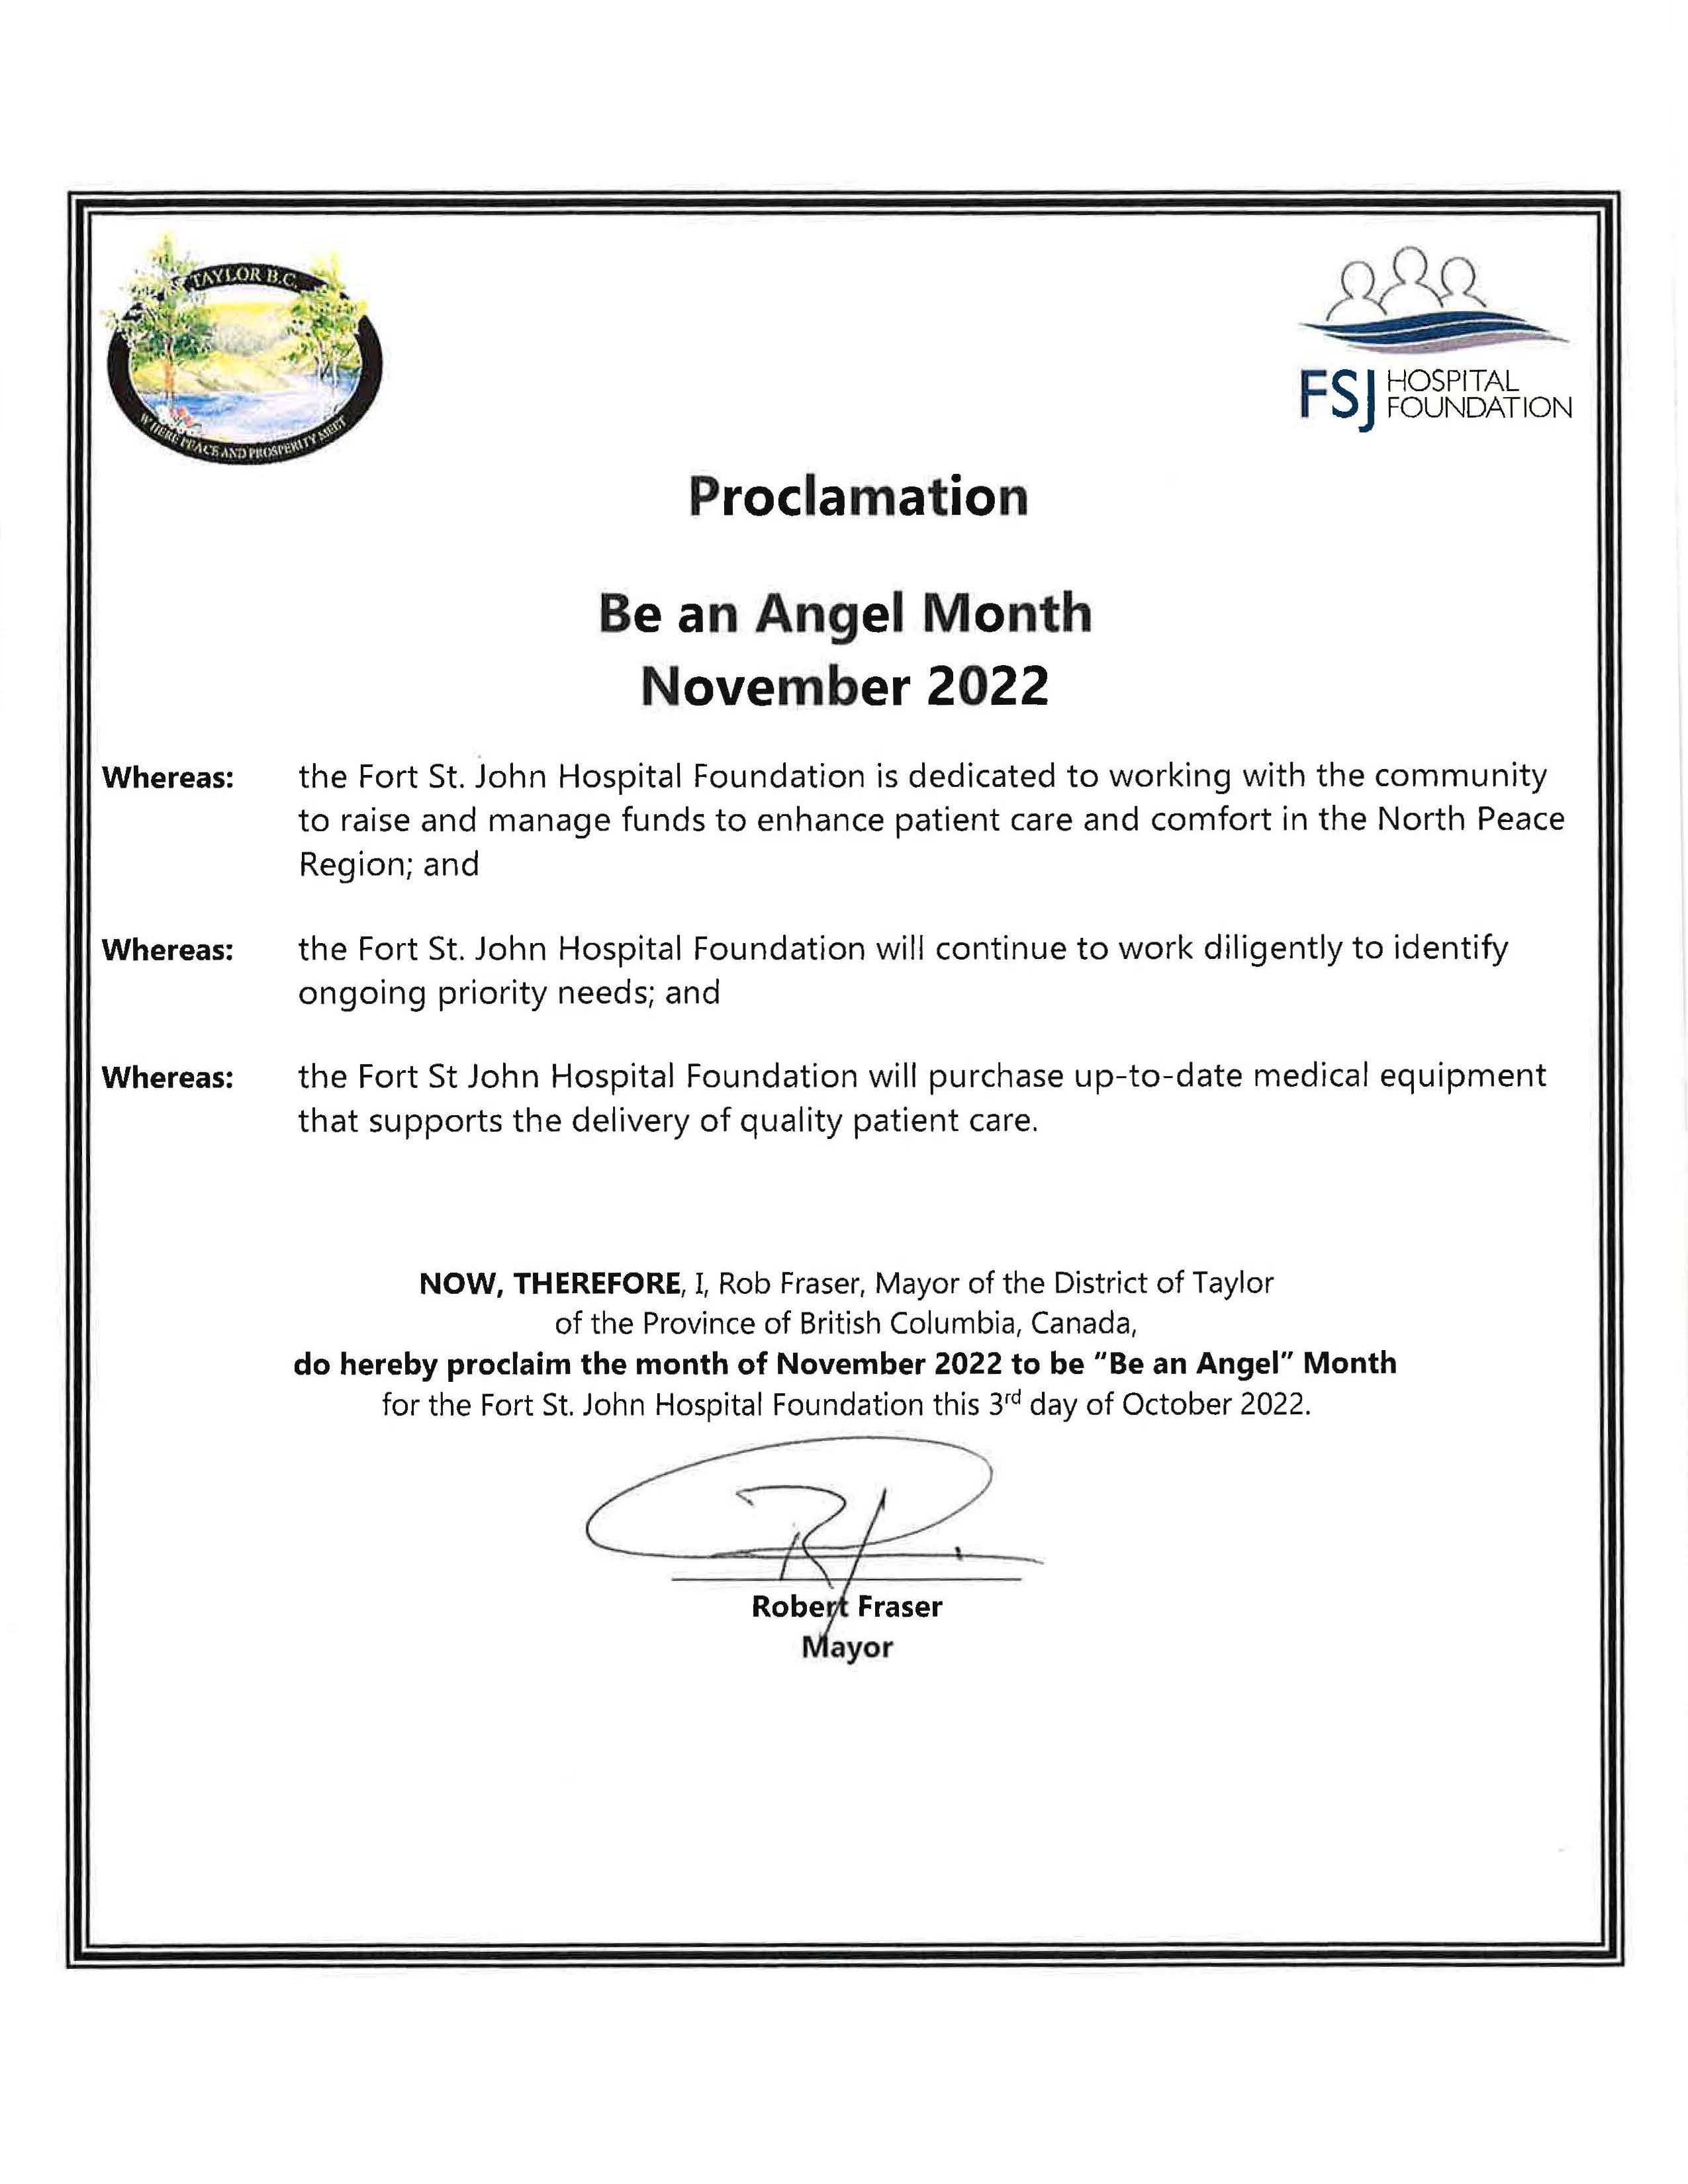 November 2022 proclaimed as ‘Be an Angel’ month